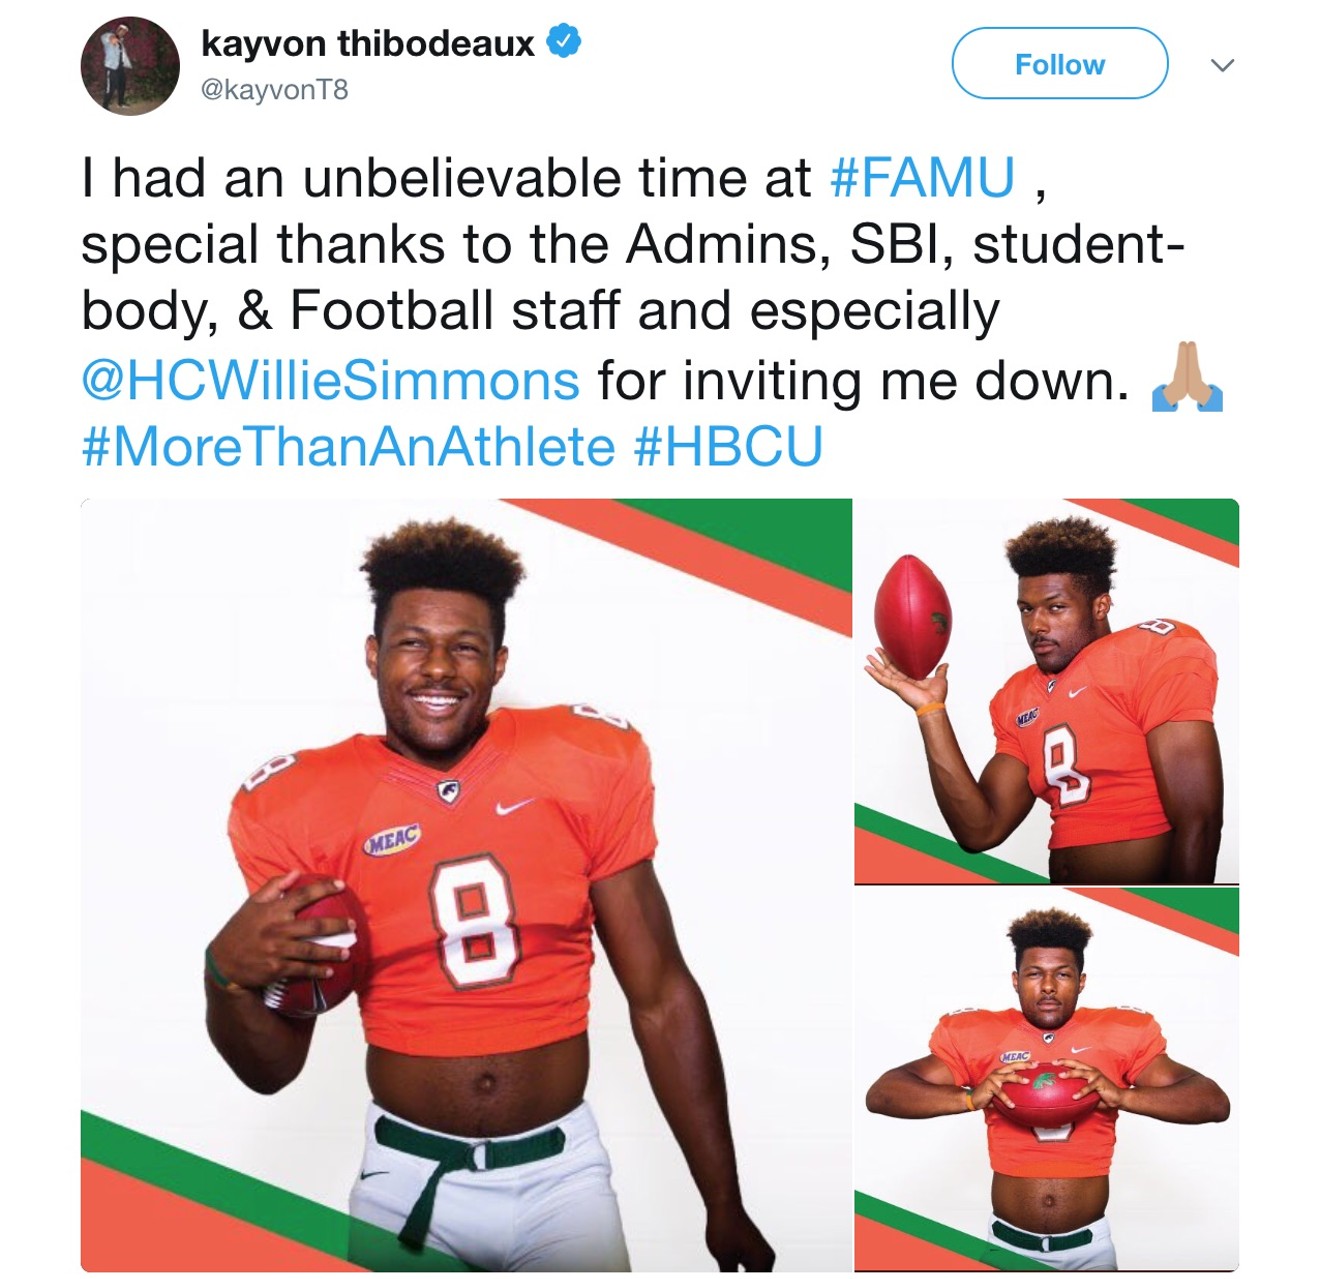 Kayvon Thibodeaux's recruiting trip to Florida A&M shows NFL could use more representation from historically black colleges.